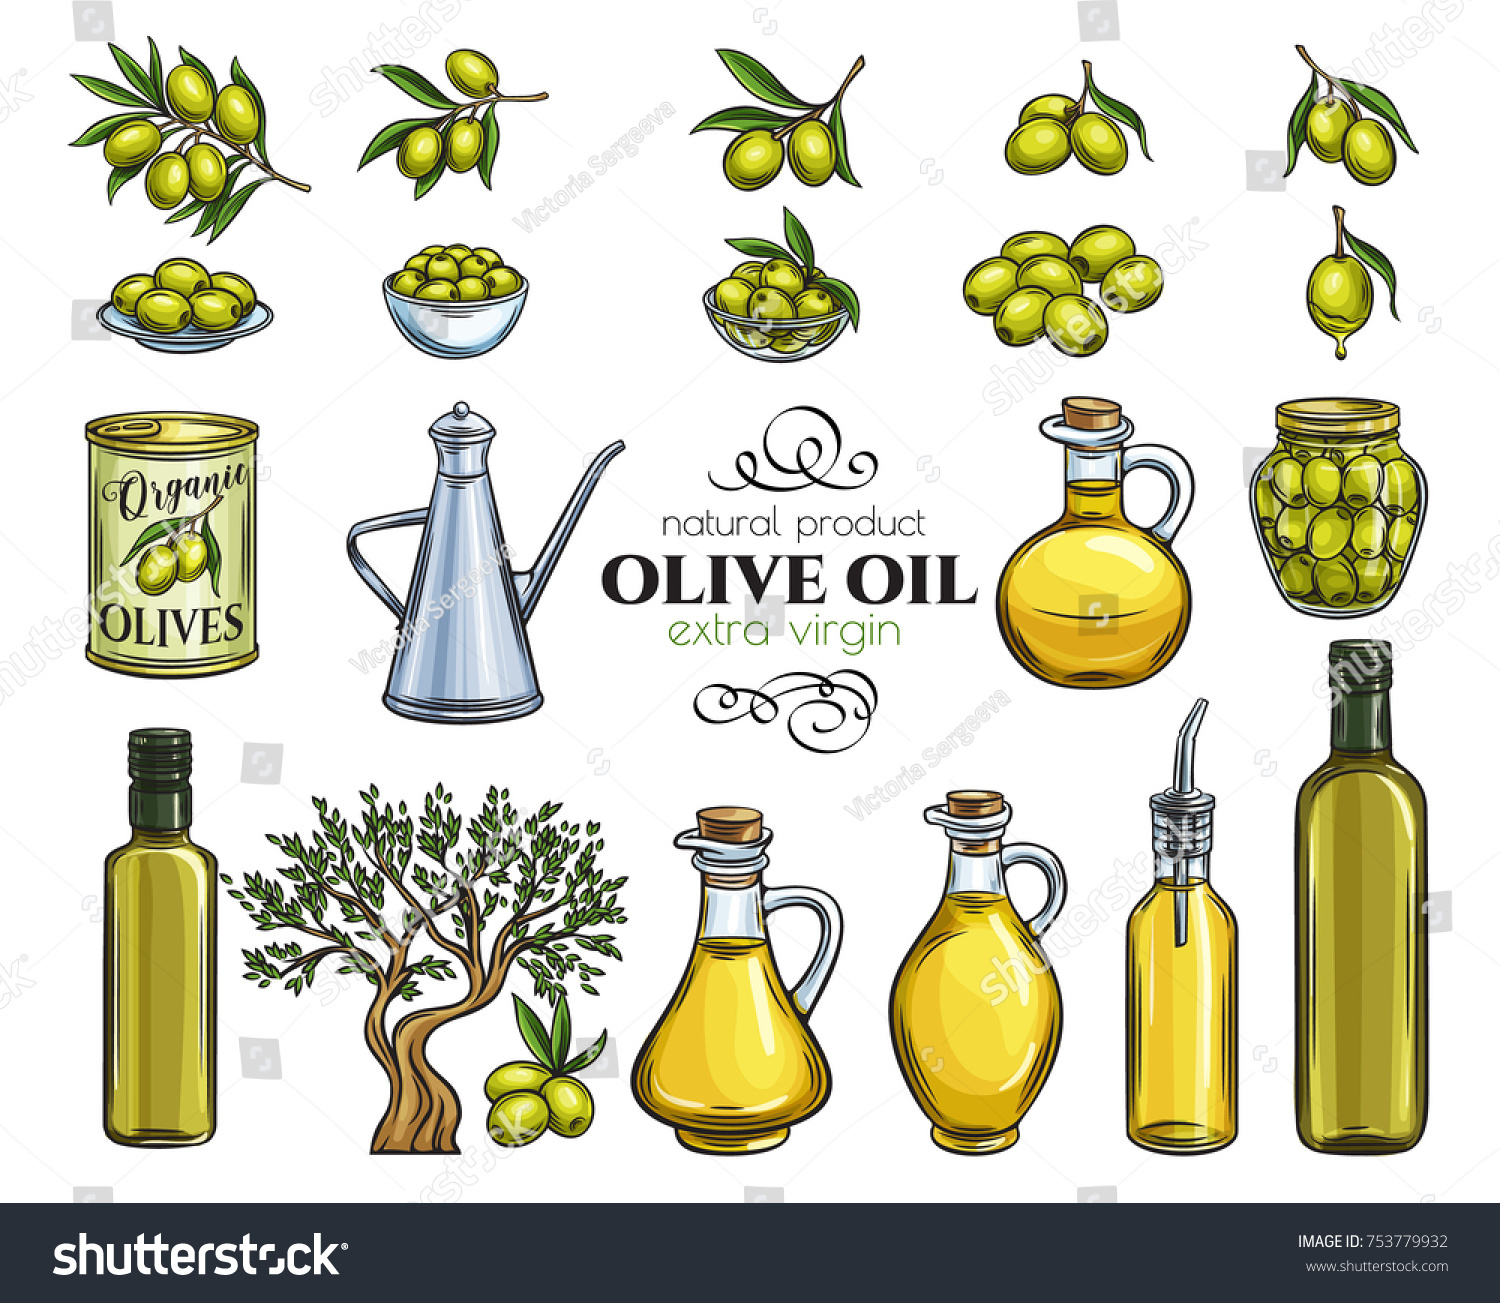 Set Vector Hand Drawn Olives Tree Stock Vector Royalty Free 753779932 Shutterstock 